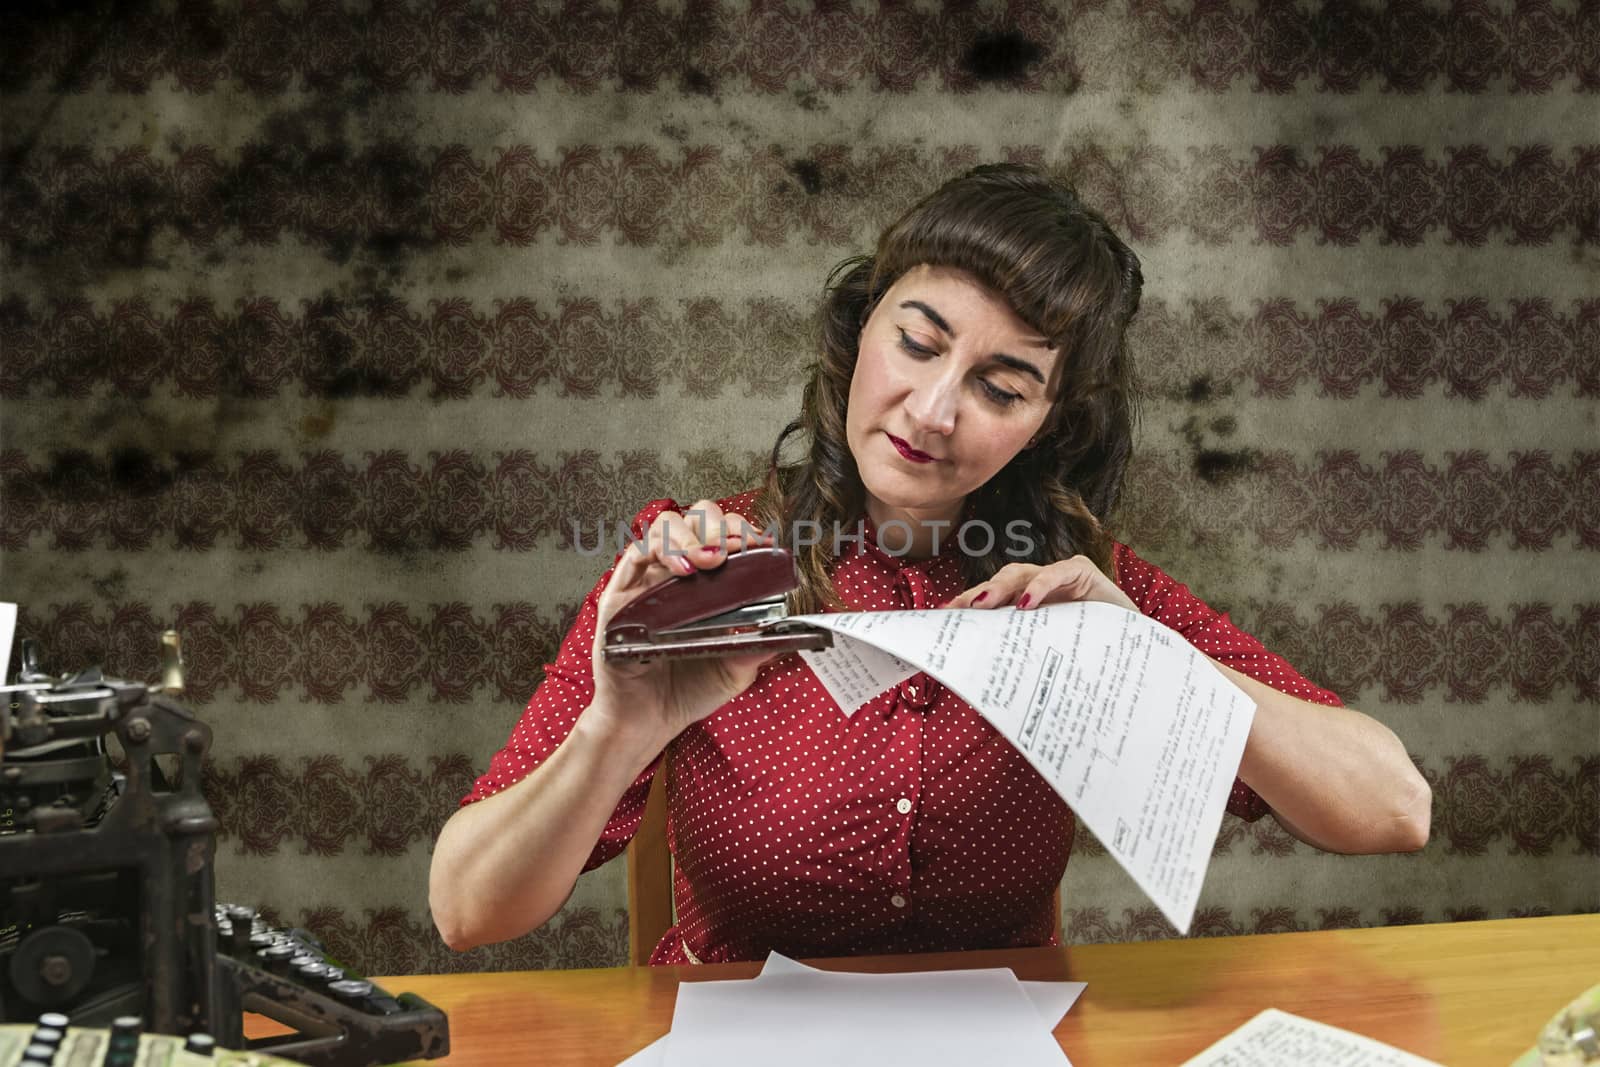 Young woman with red dress stapling papers in office, 1960's by digicomphoto